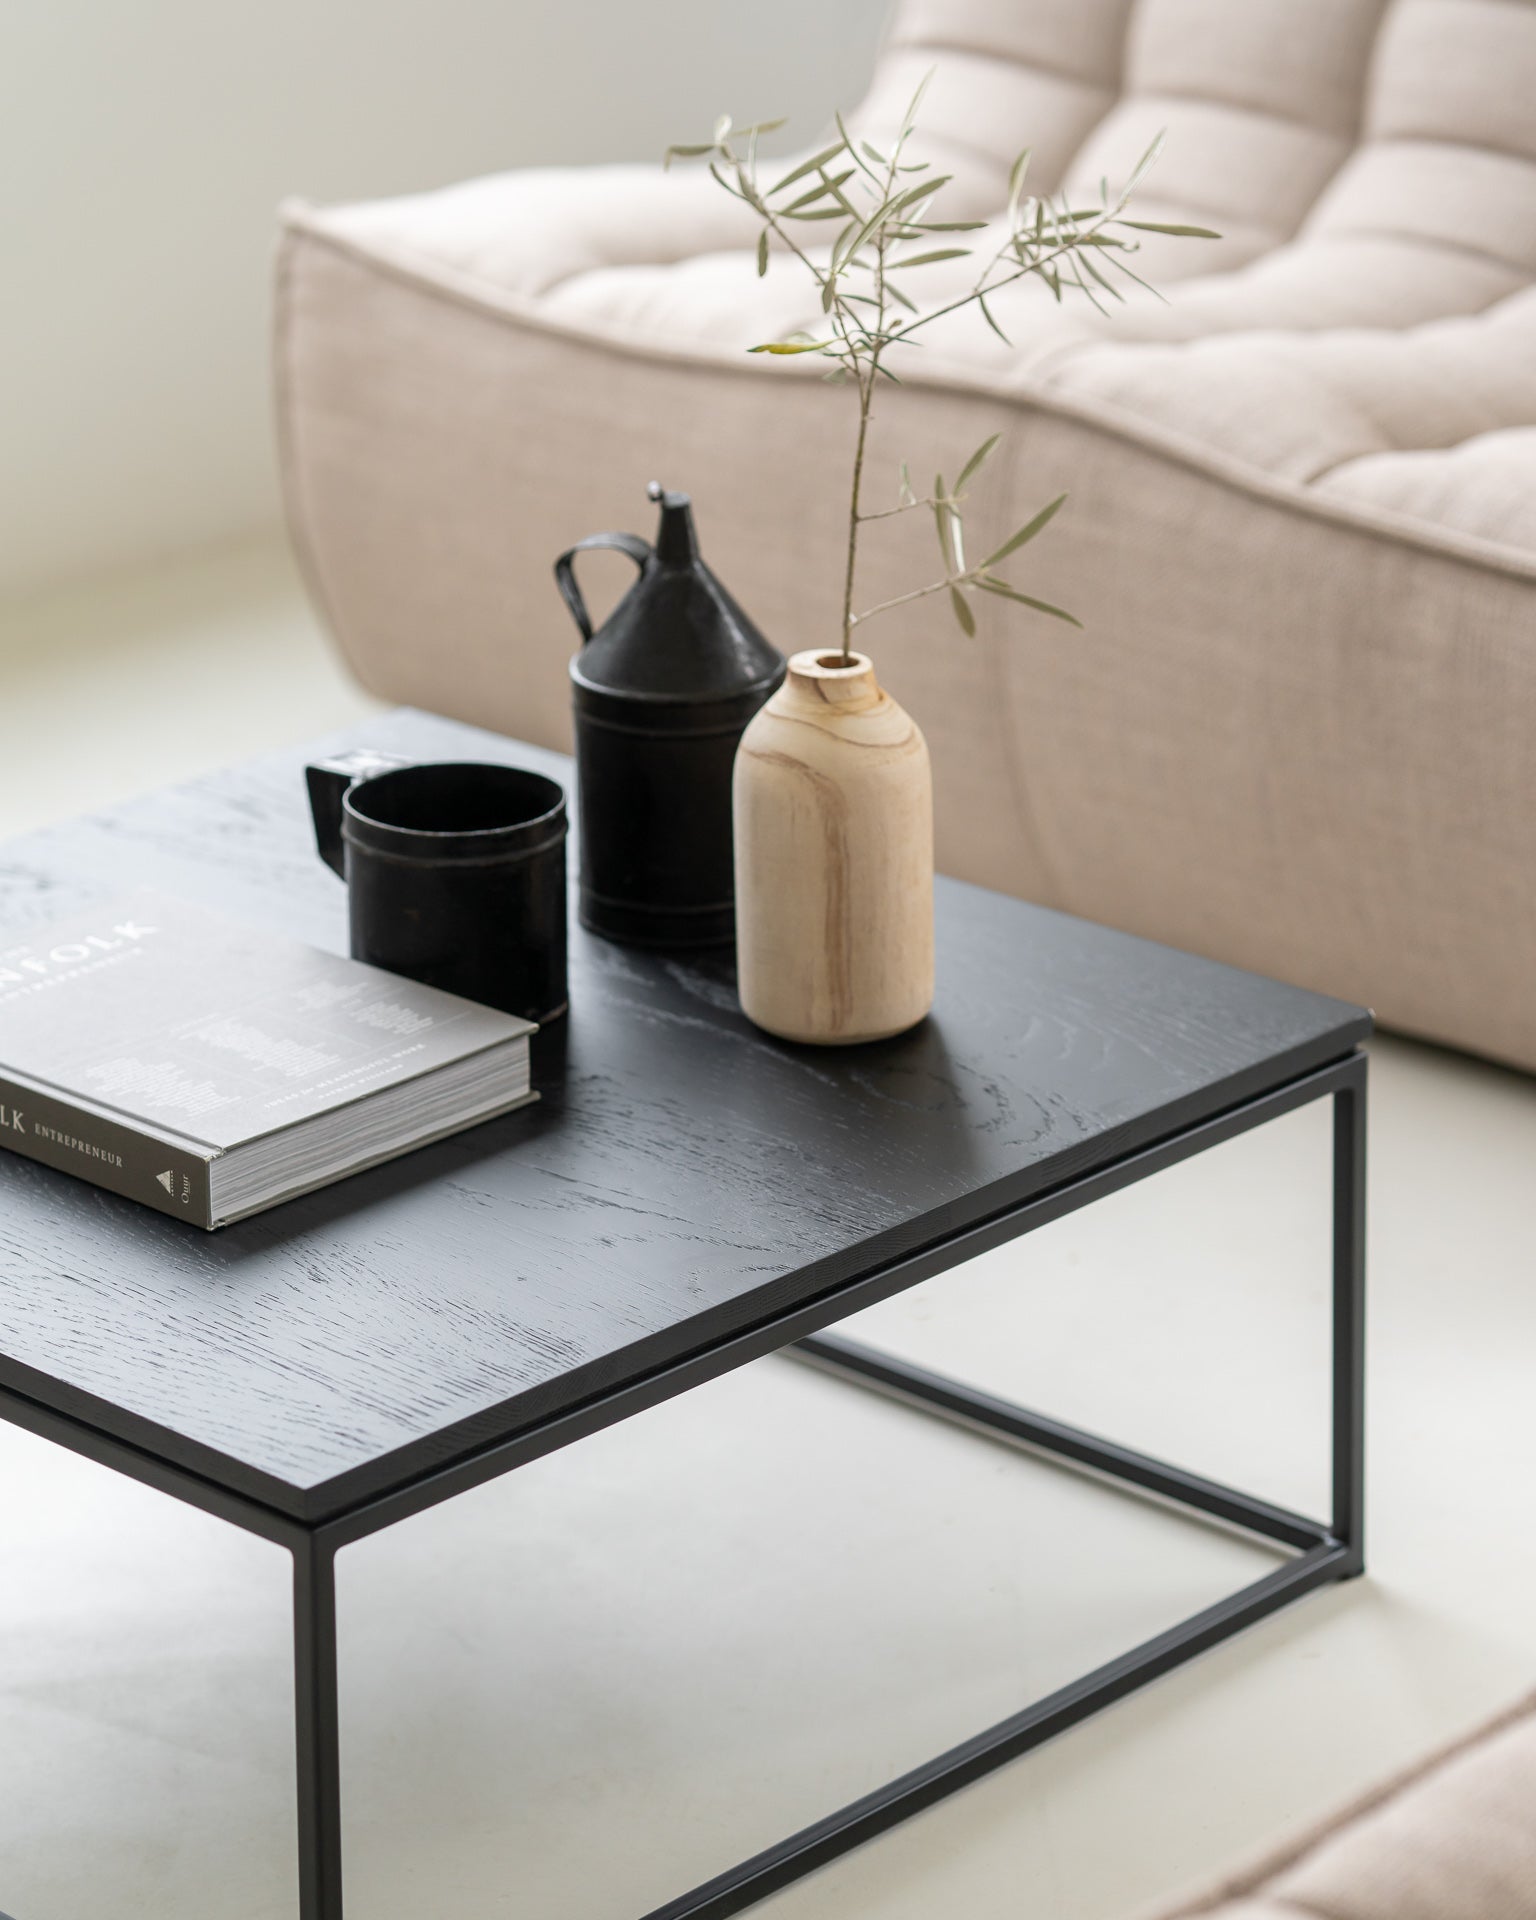 Ethnicraft Oak Thin Black Coffee Table available from Make Your House A Home, Bendigo, Victoria, Australia